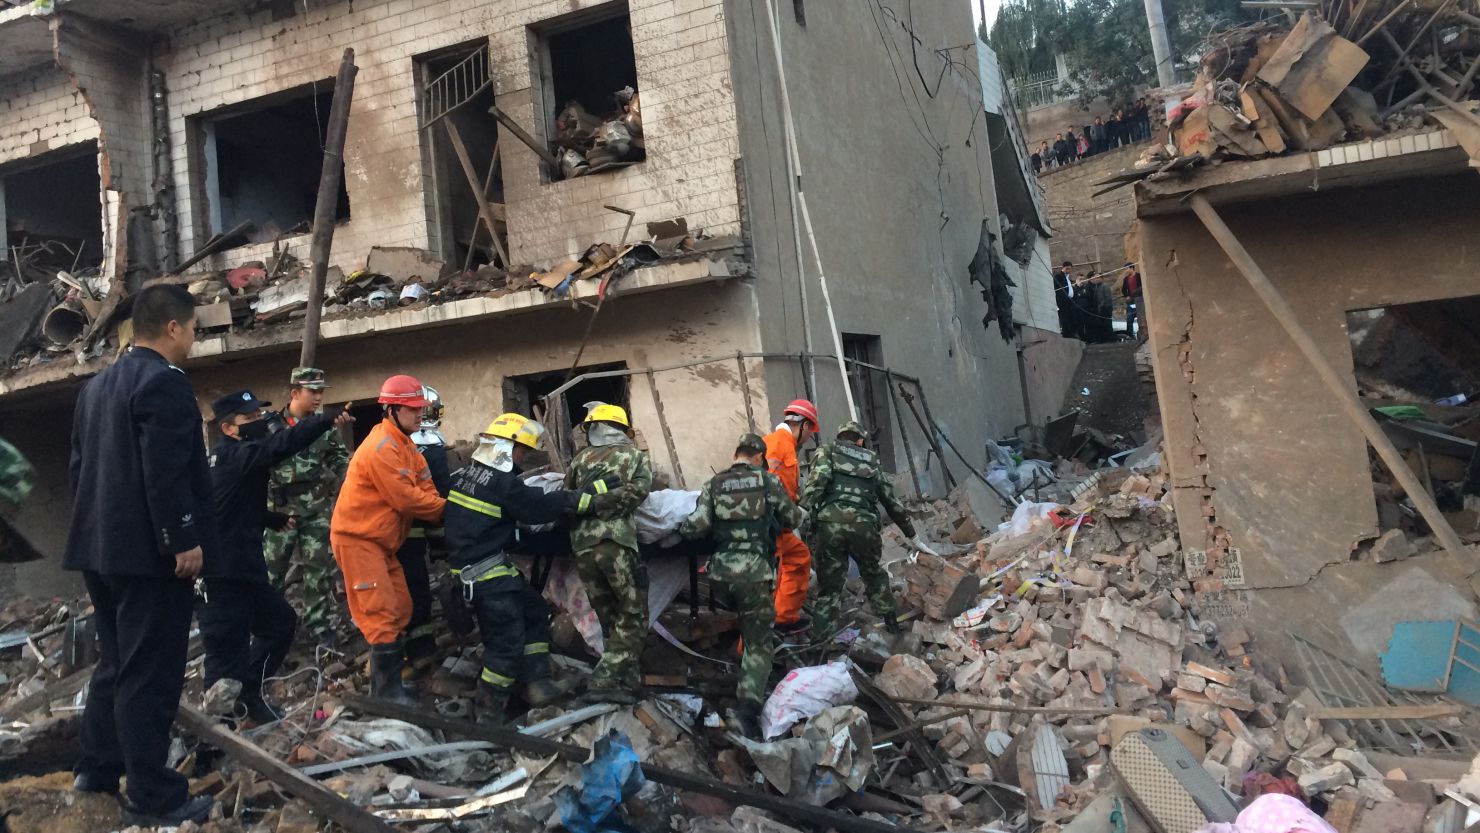 Rescuers work at the site of an explosion in Xinmin town on October 24, 2016 in Fugu County, China.